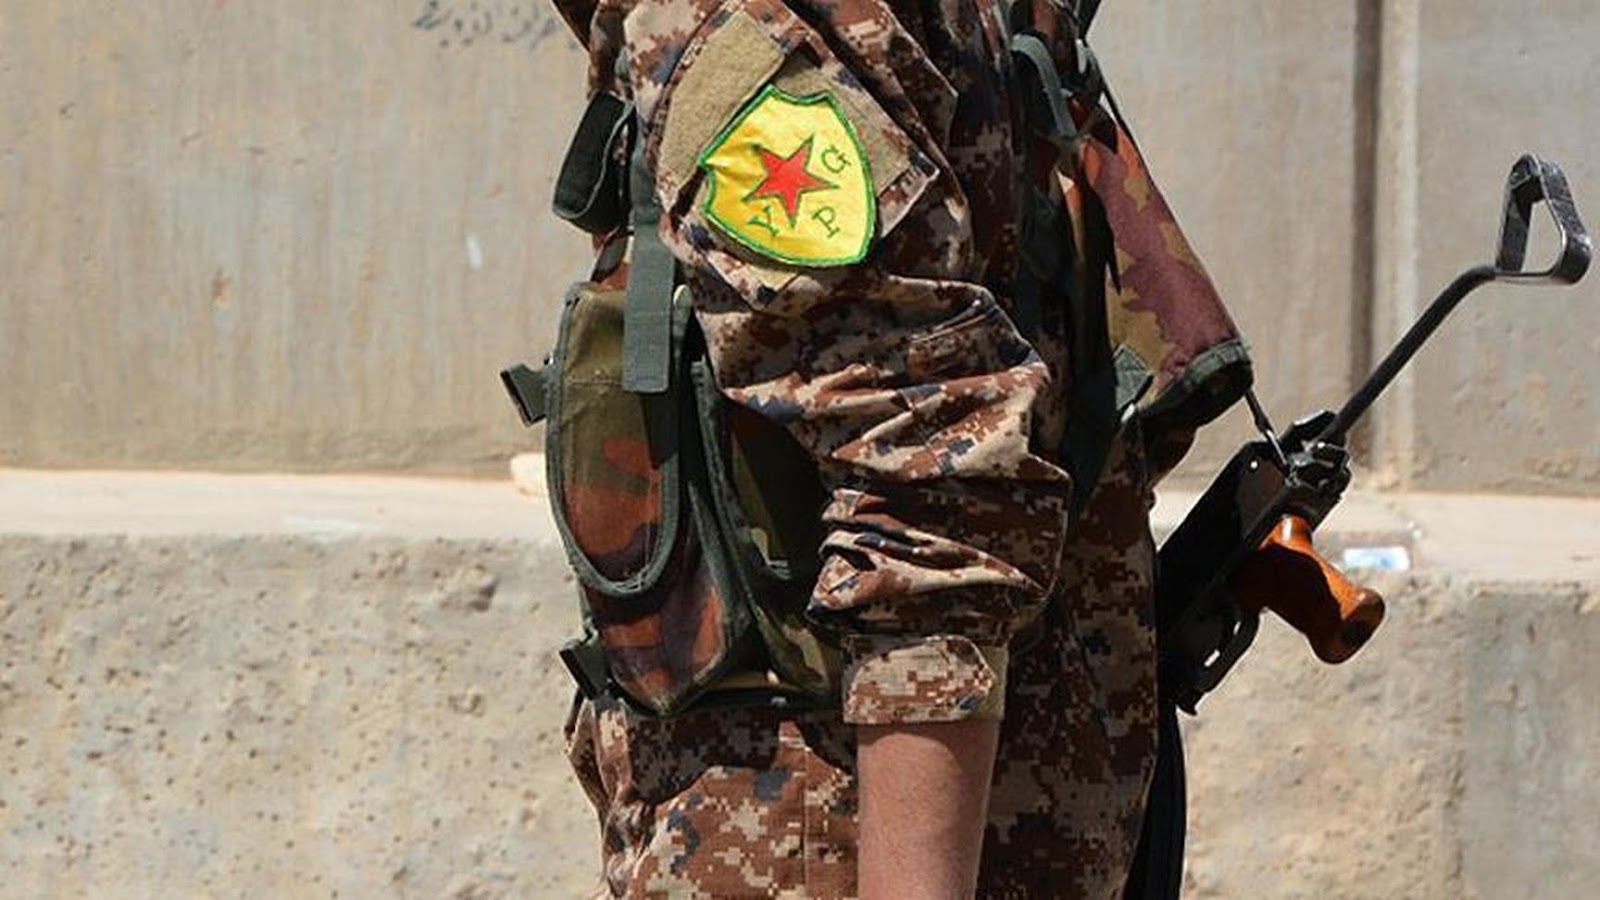 SOC Raises Concerns Over Ongoing "Partnership" with PYD Terrorist Militia